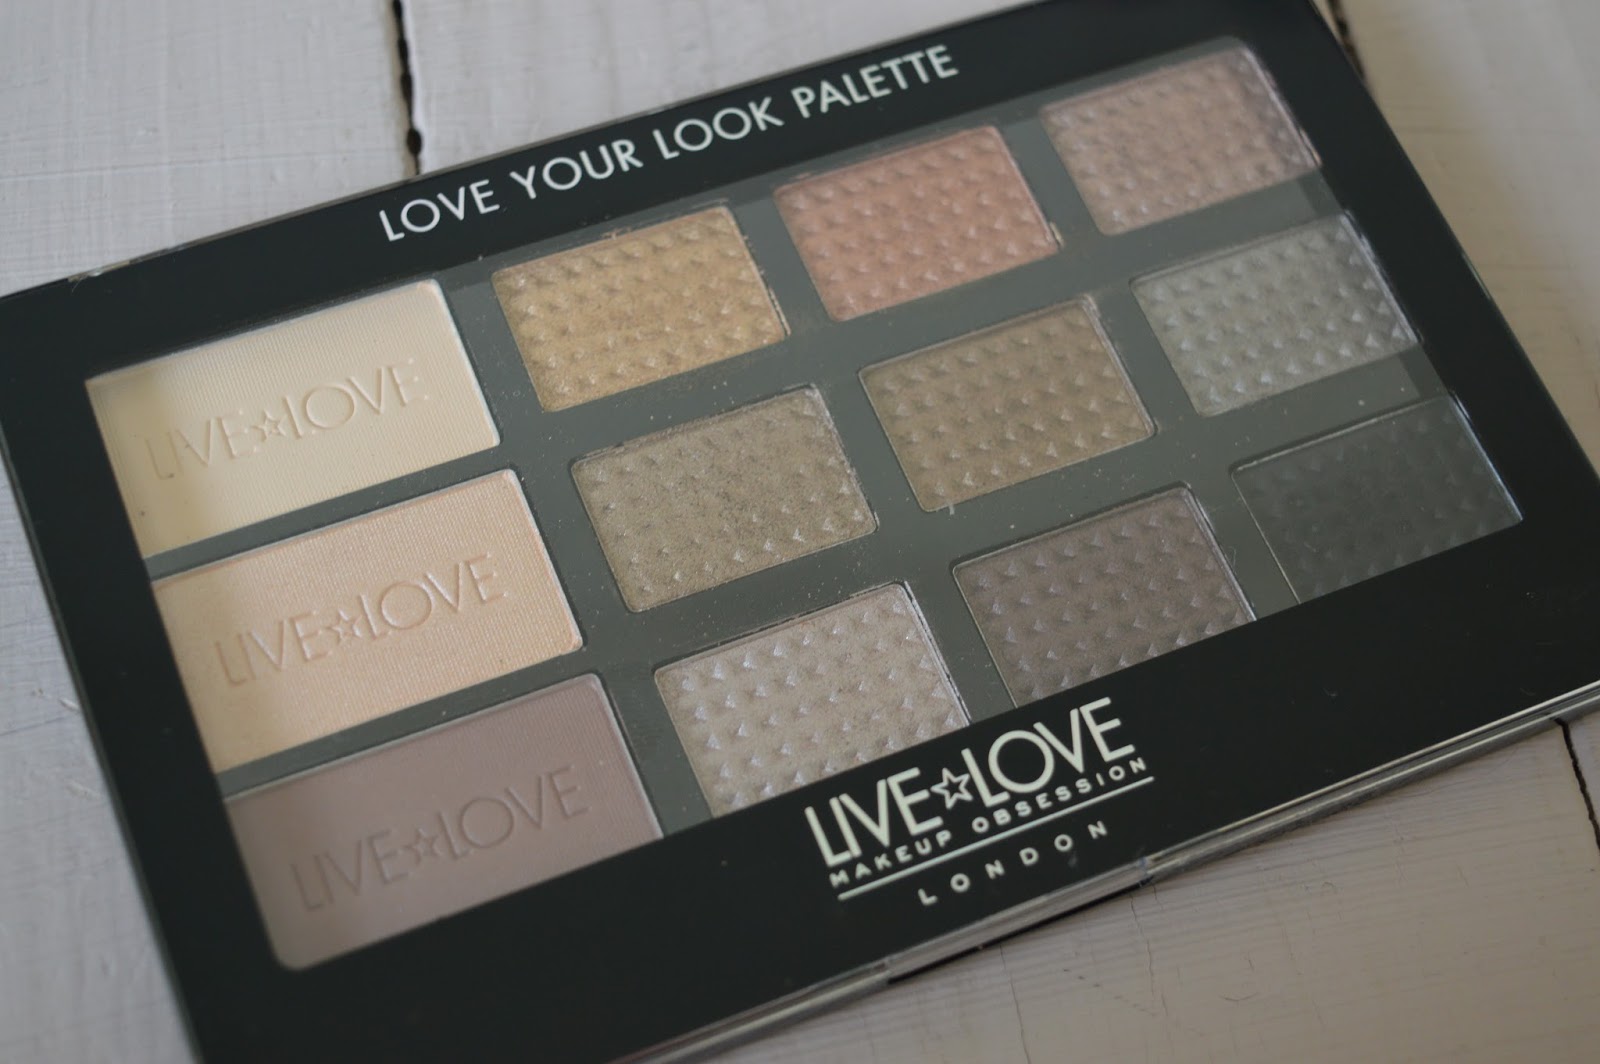 Love Makeup Obsession And What Is Their Love Your Look Palette Like